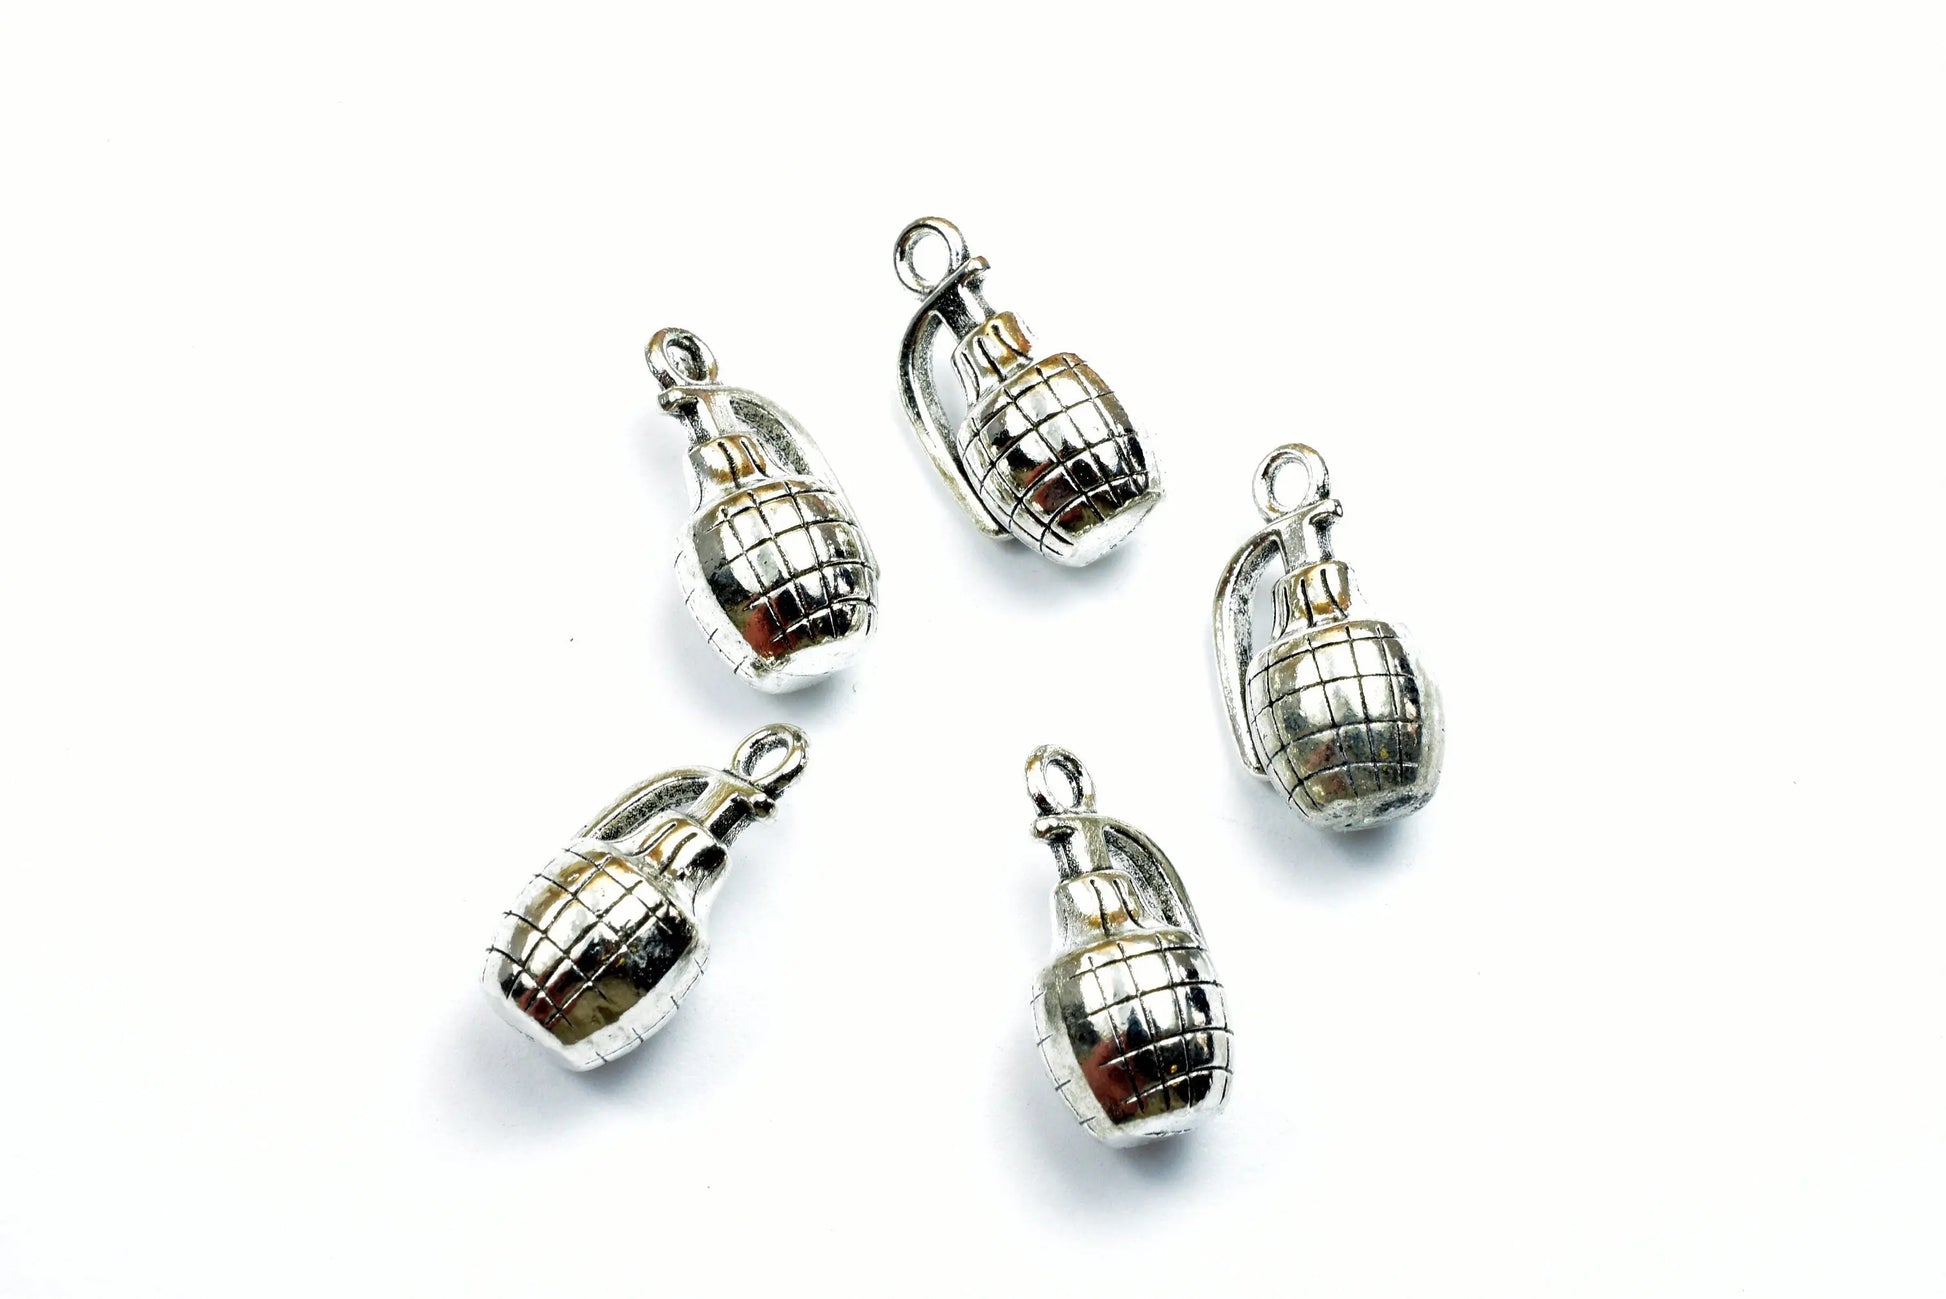 Grenade or Gun Charms Size 18.5x10mm, 23x12mm Silver Color Charm Double Face Pendant Finding For Jewelry Making - BeadsFindingDepot